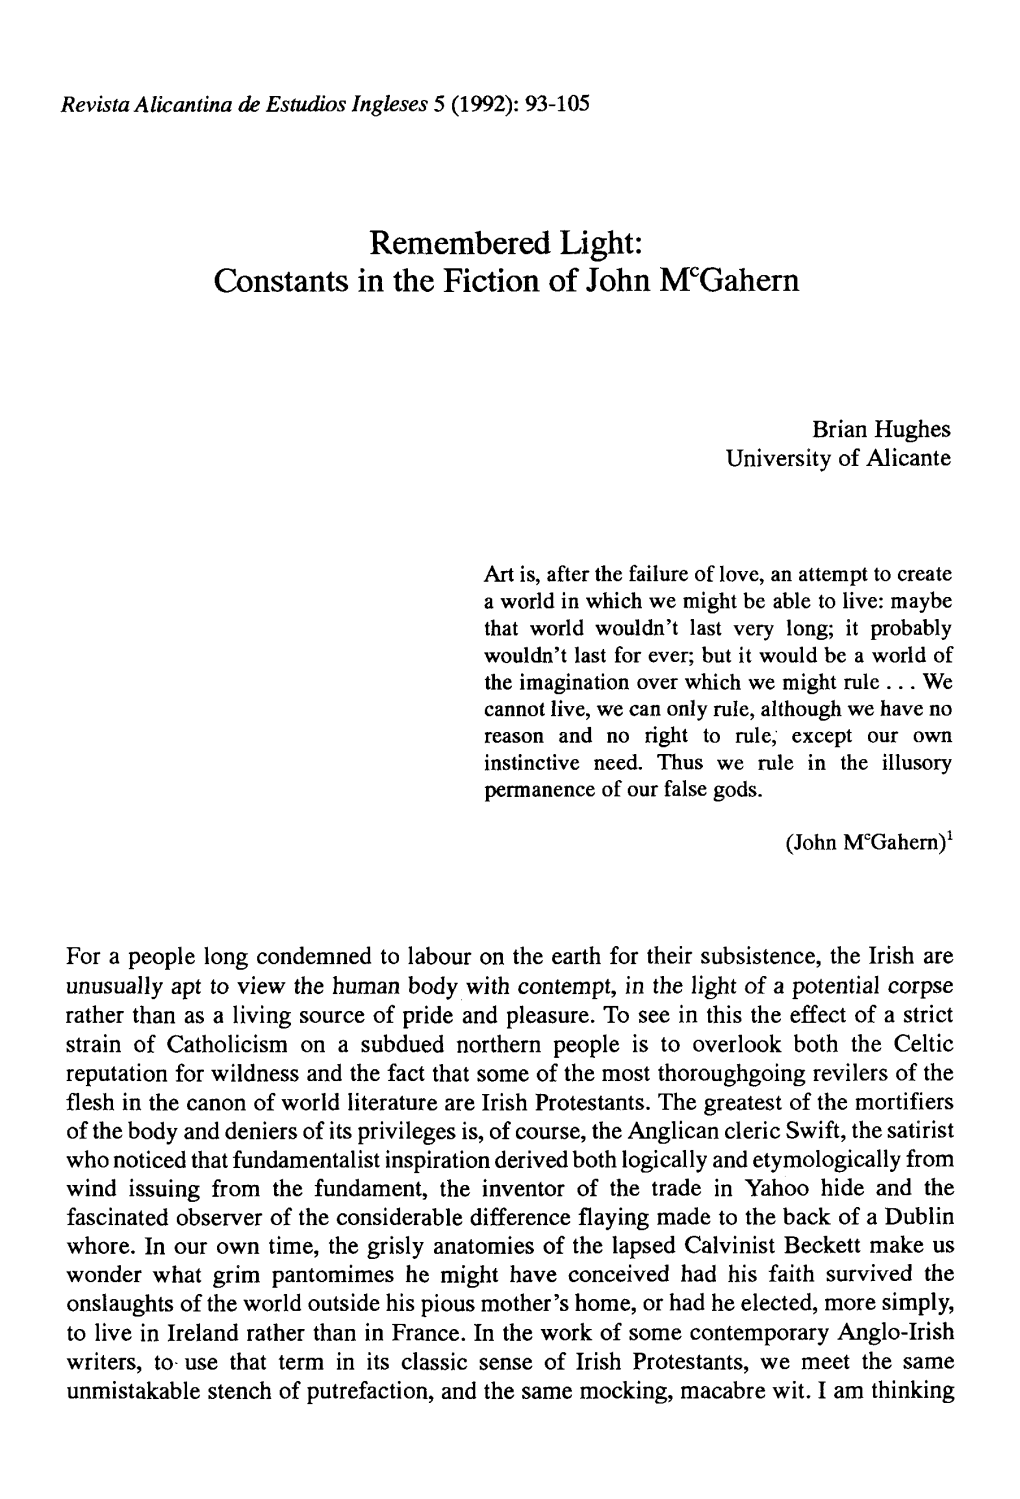 Remembered Light: Constants in the Fiction of John Mcgahern